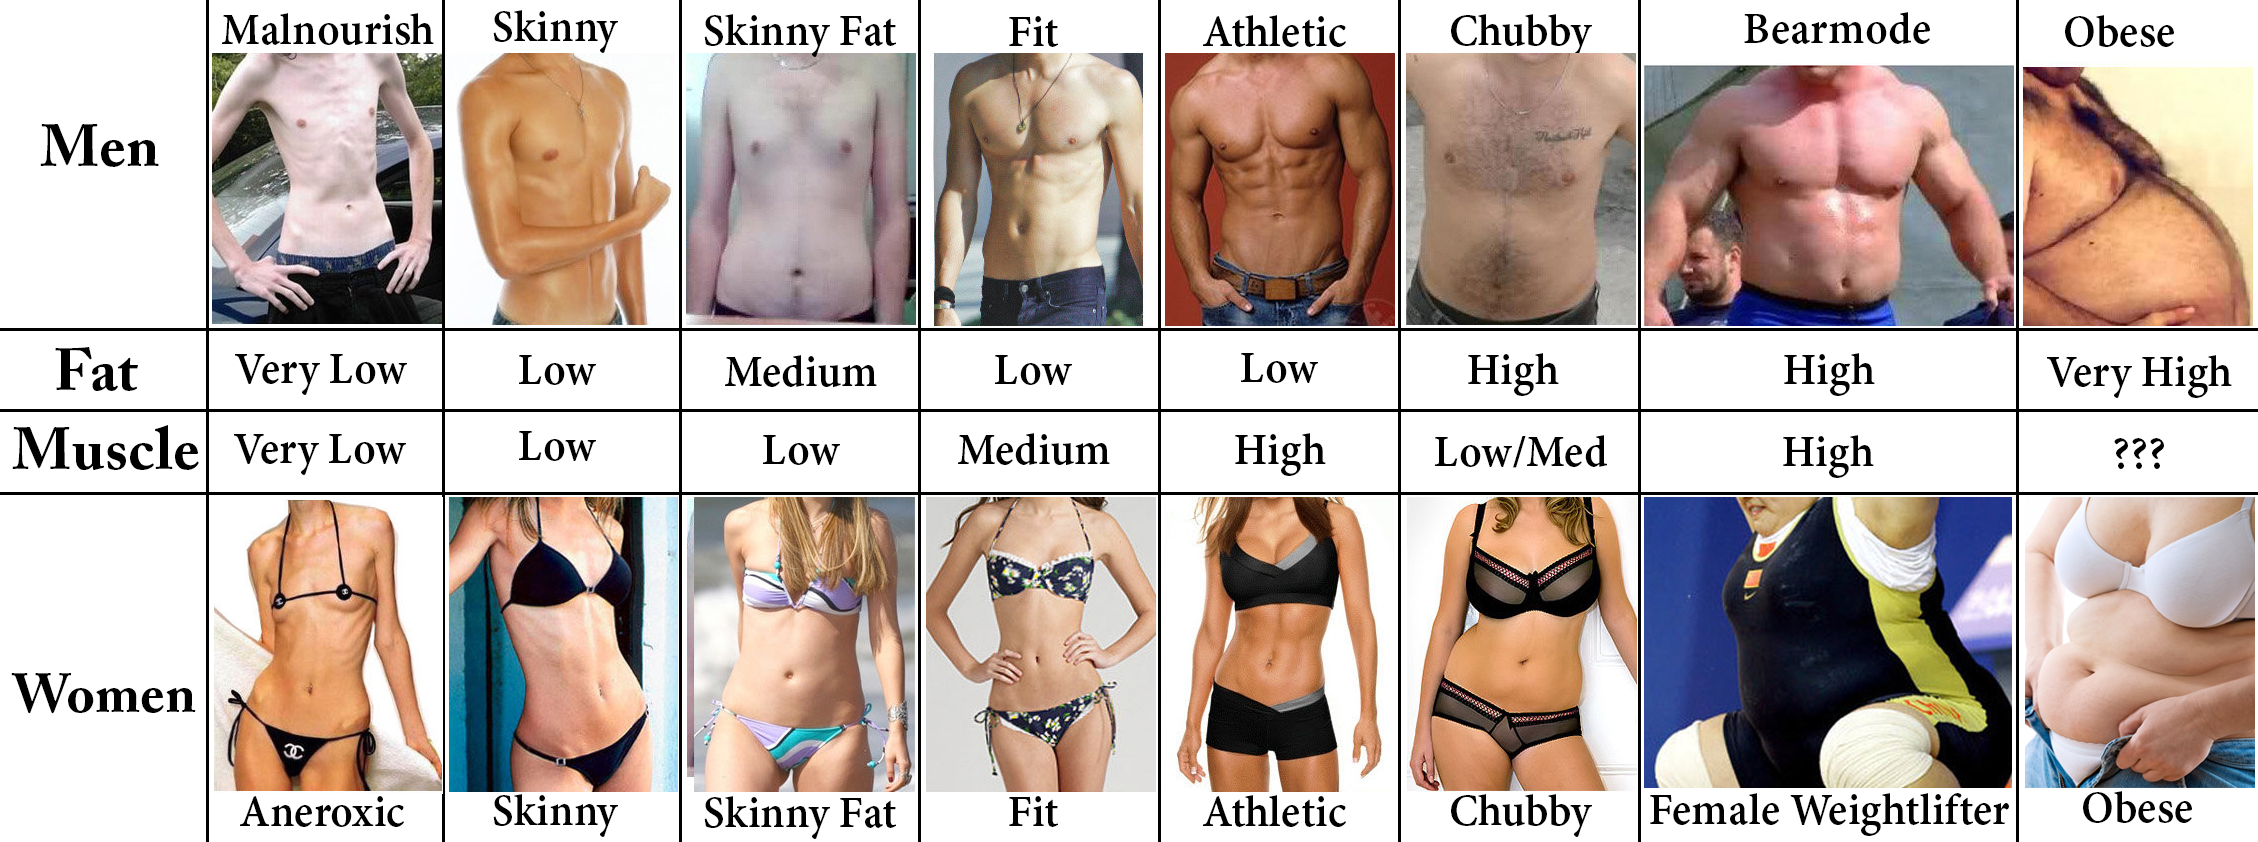 Skinny To Fat Chart - Do You Know What Too Fat Looks Like Society The Guard...